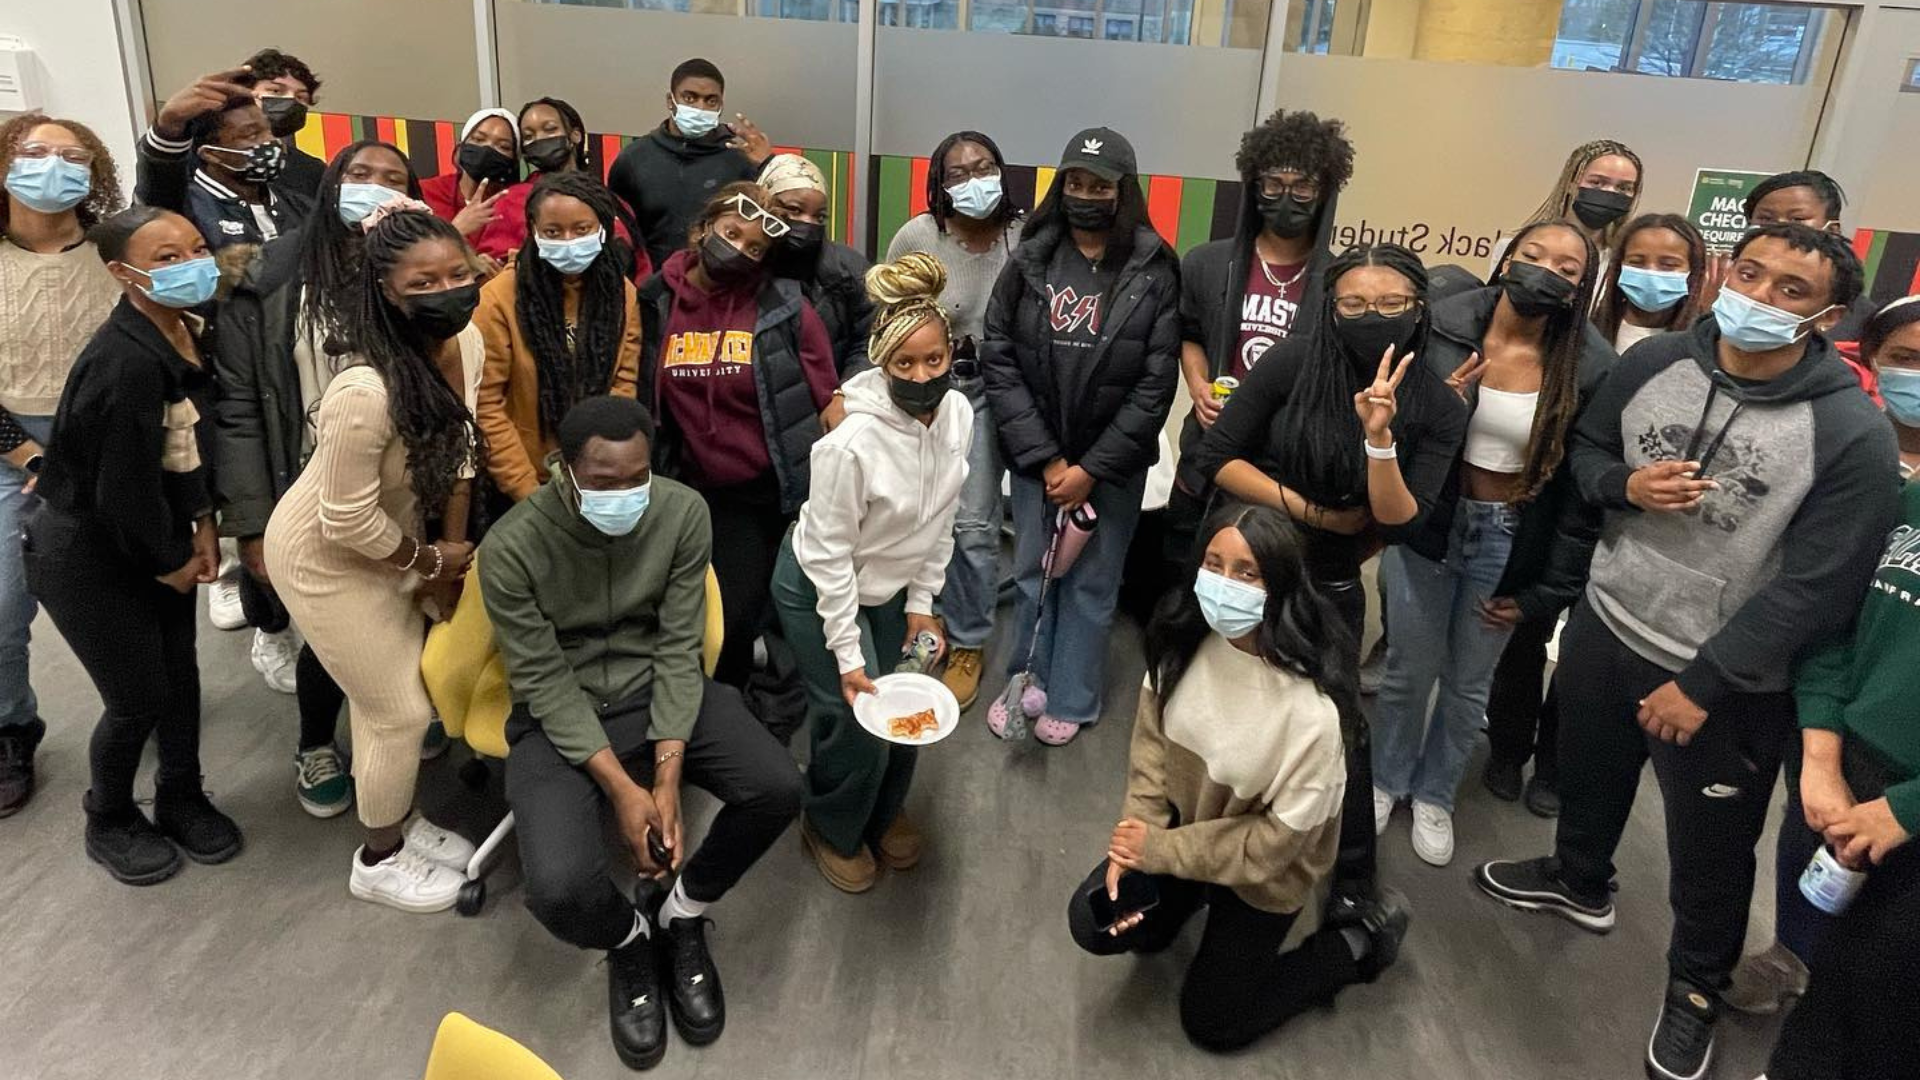 A group of students wearing masks and huddled together, posing for a photo